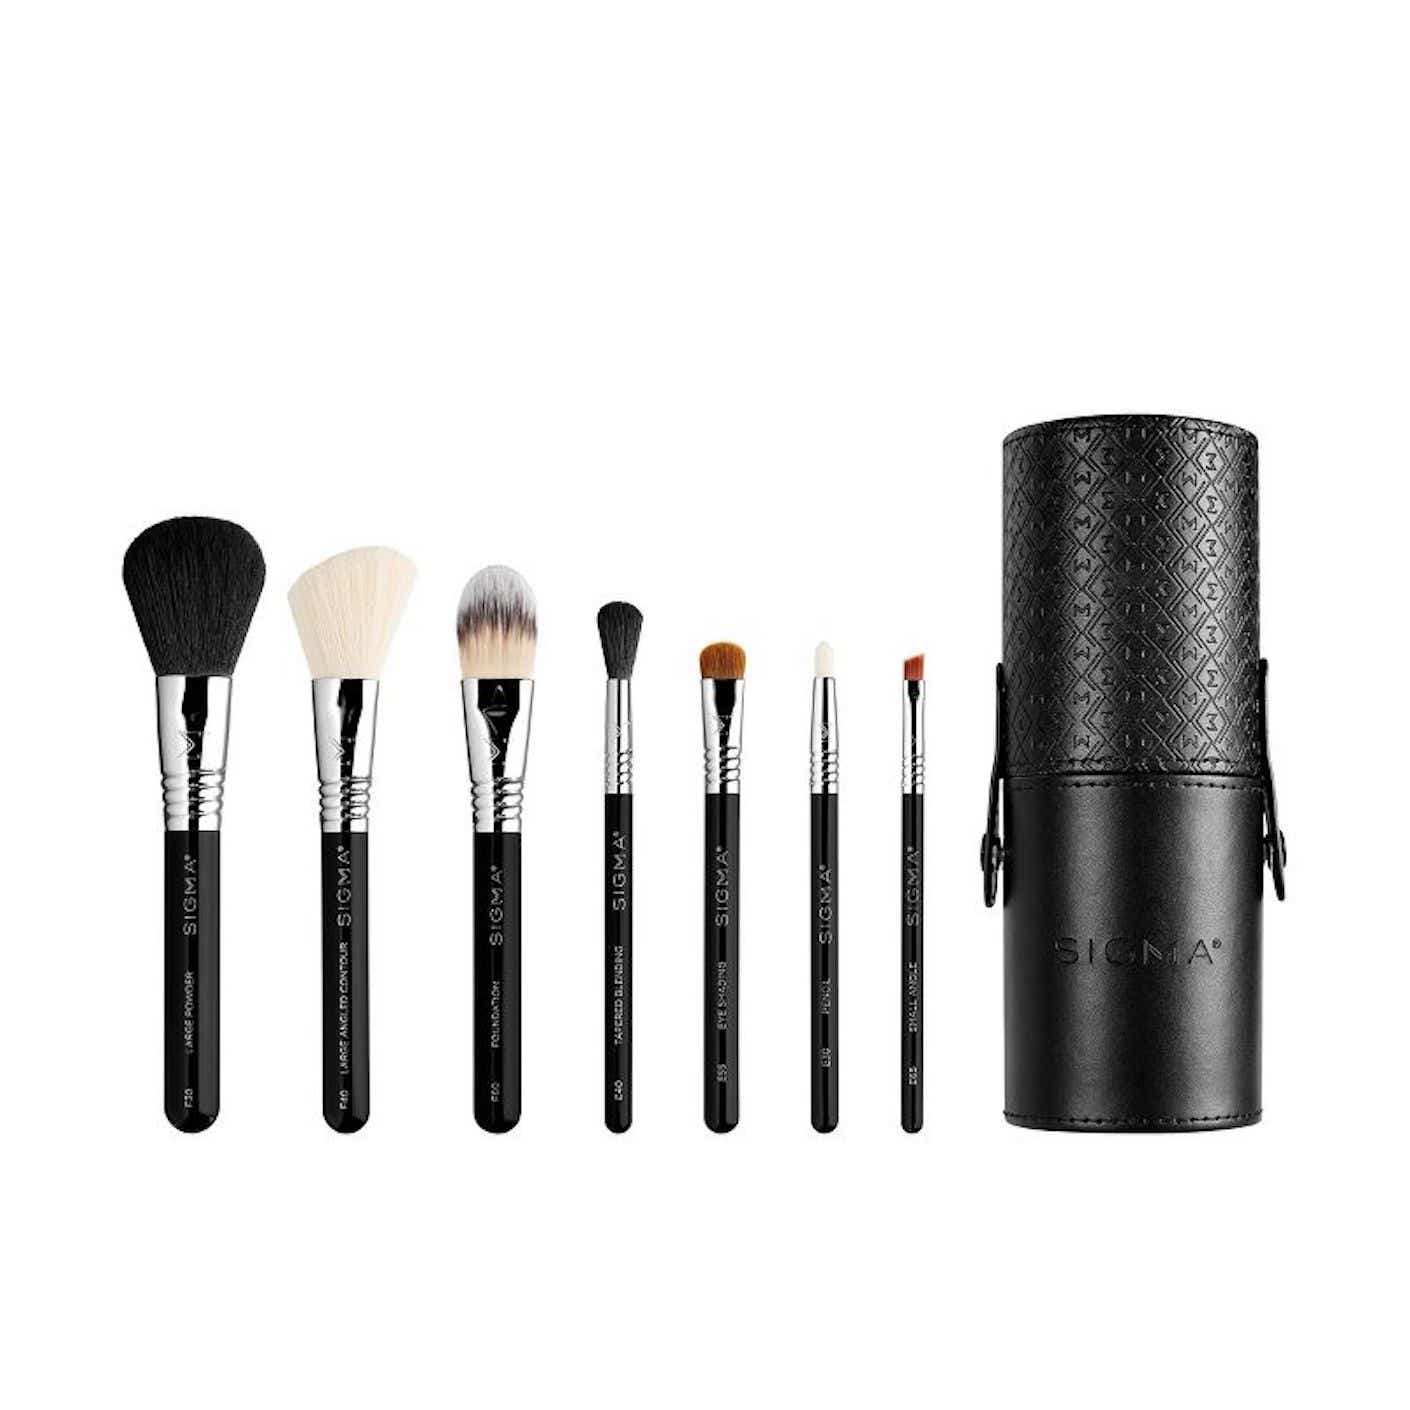 Seven brushes of different types are lined up next to a portable cylindrical brush holder.